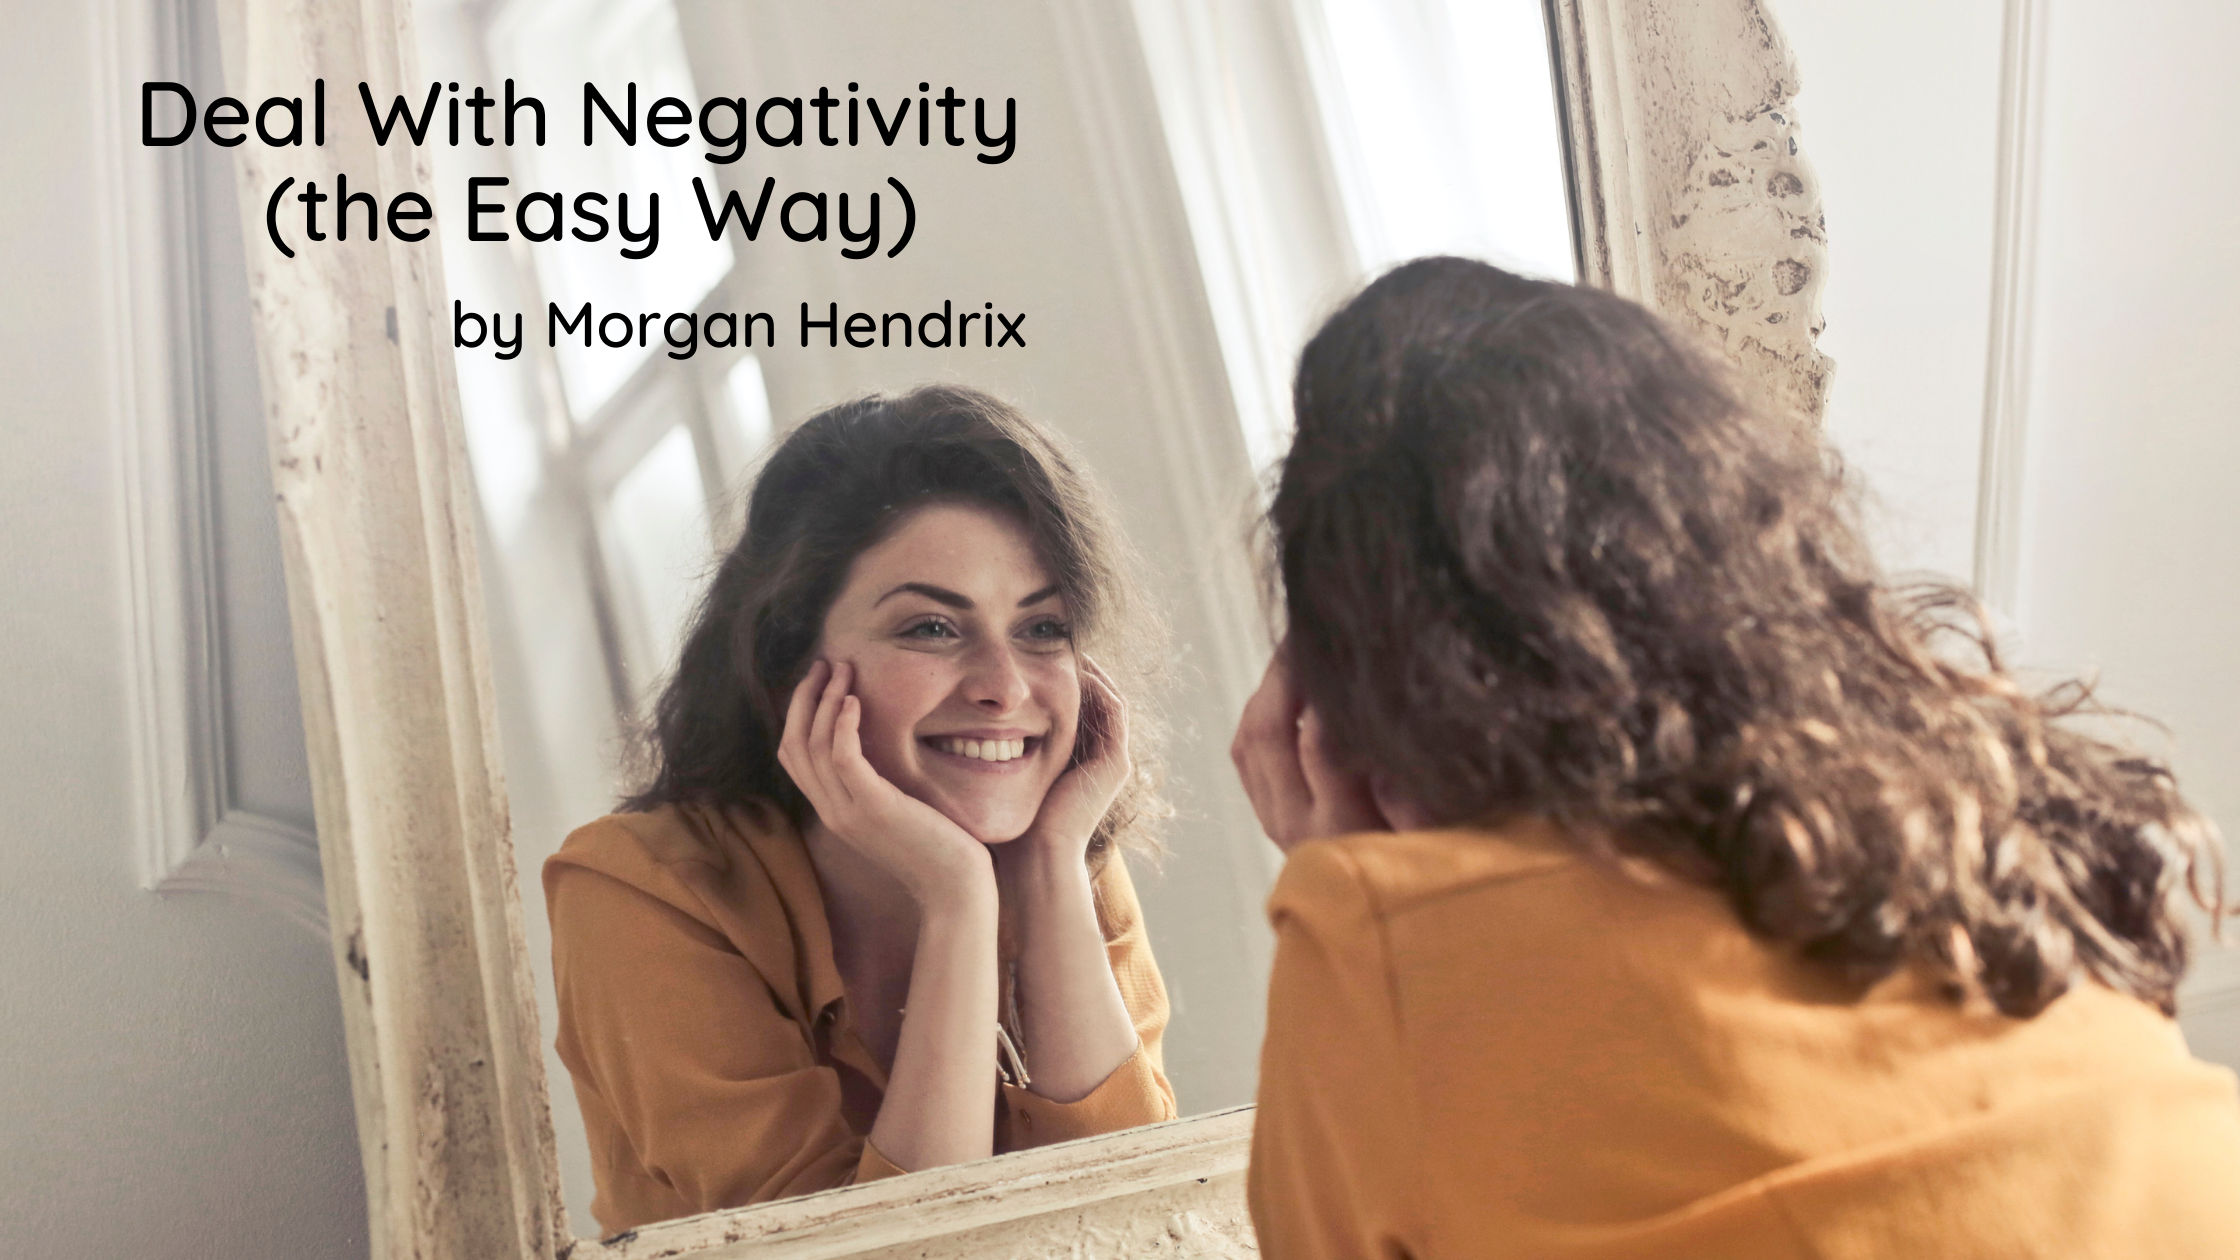 Deal With Negativity the Easy Way